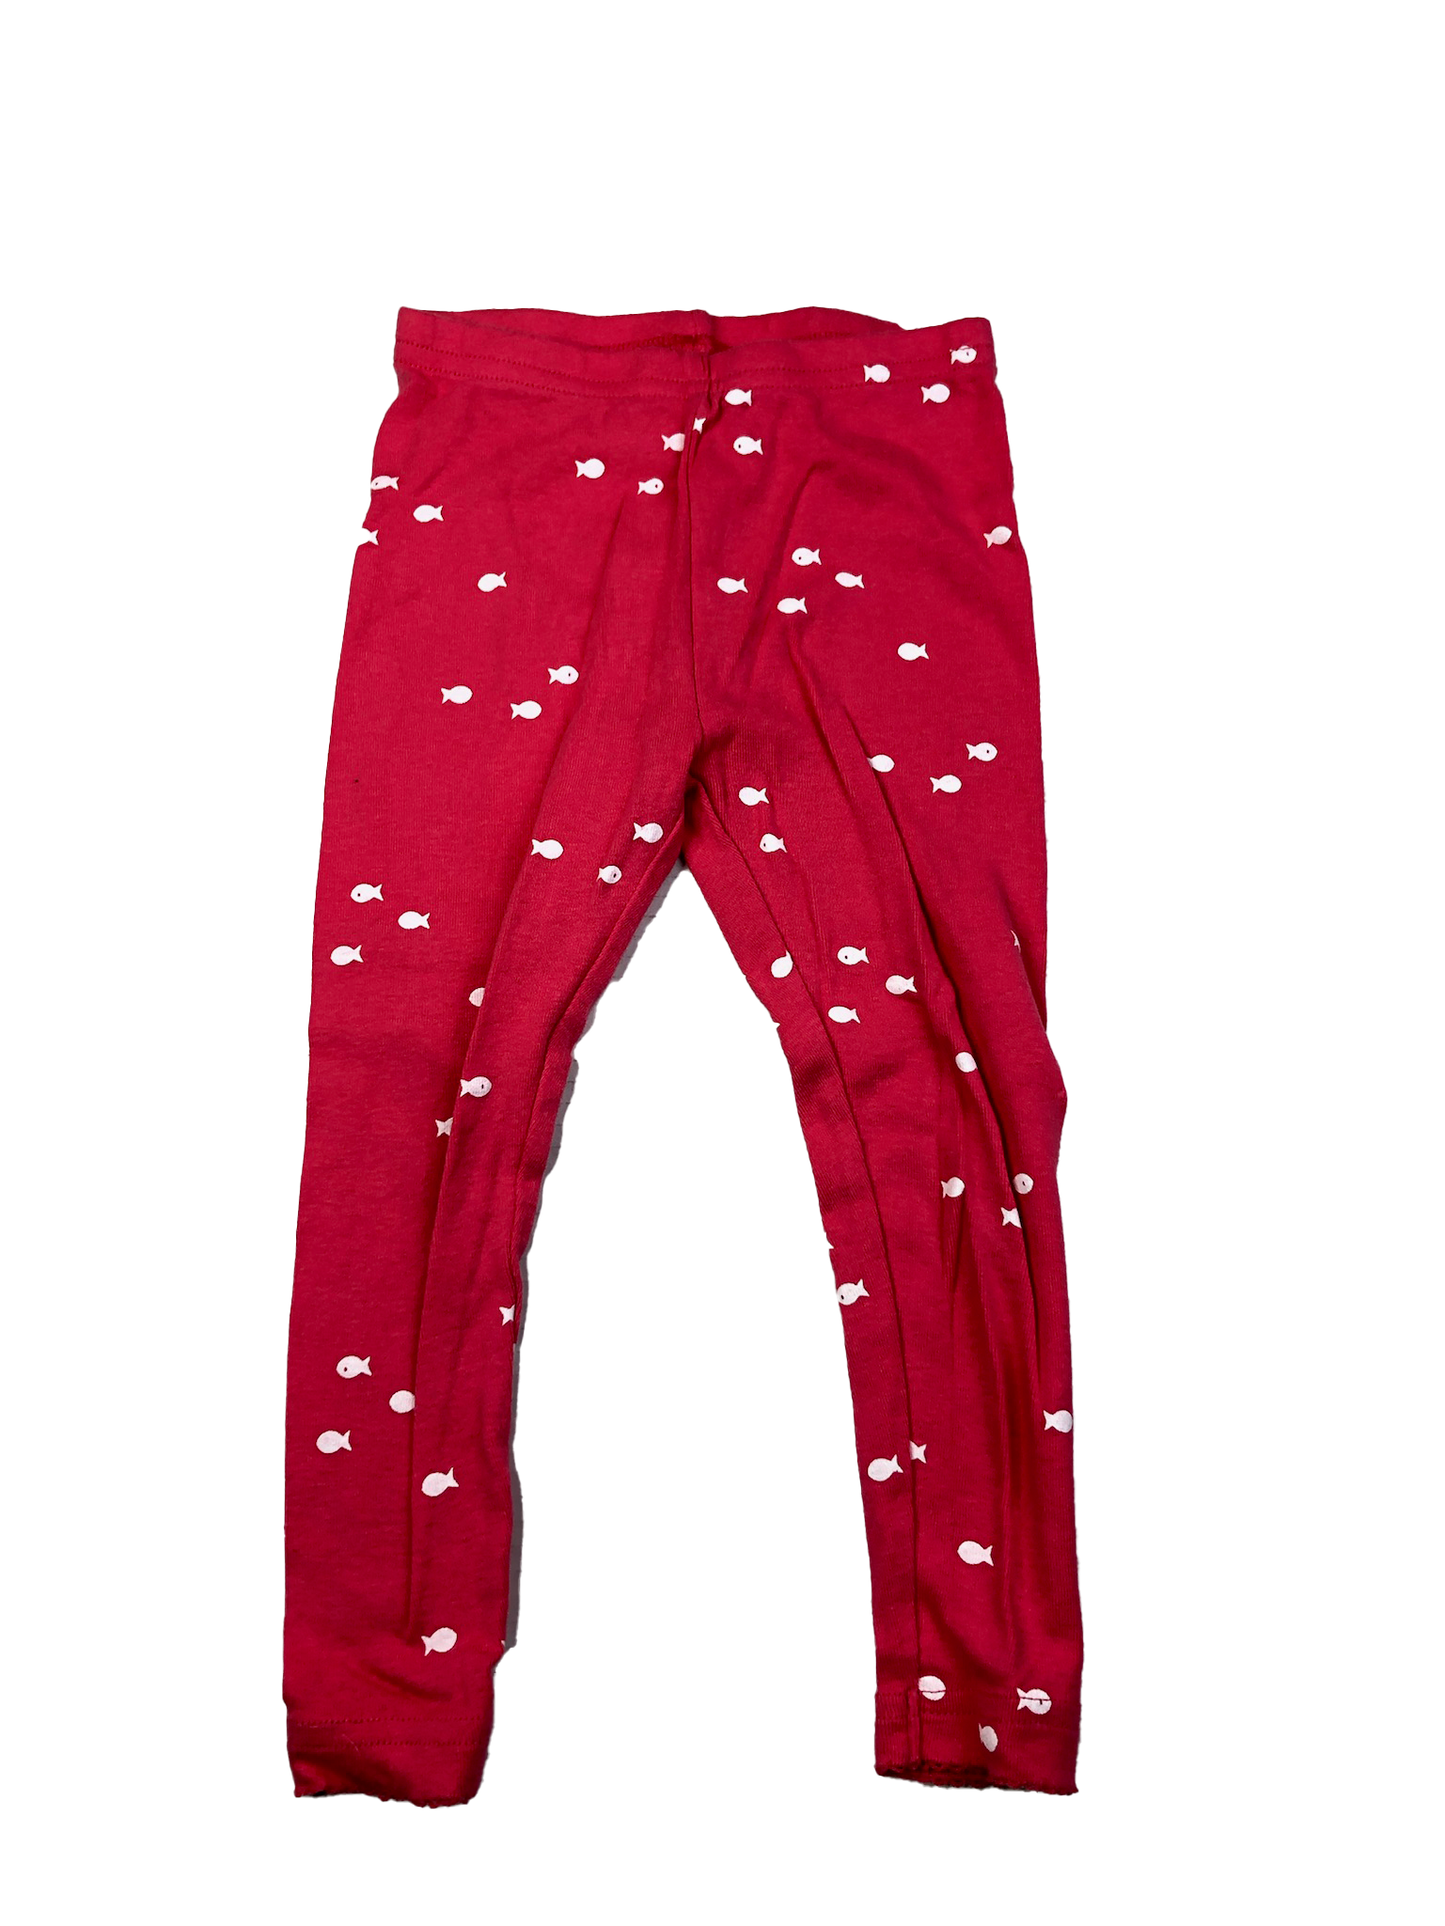 Carter's Pink PJ Bottoms with White Fish 24M